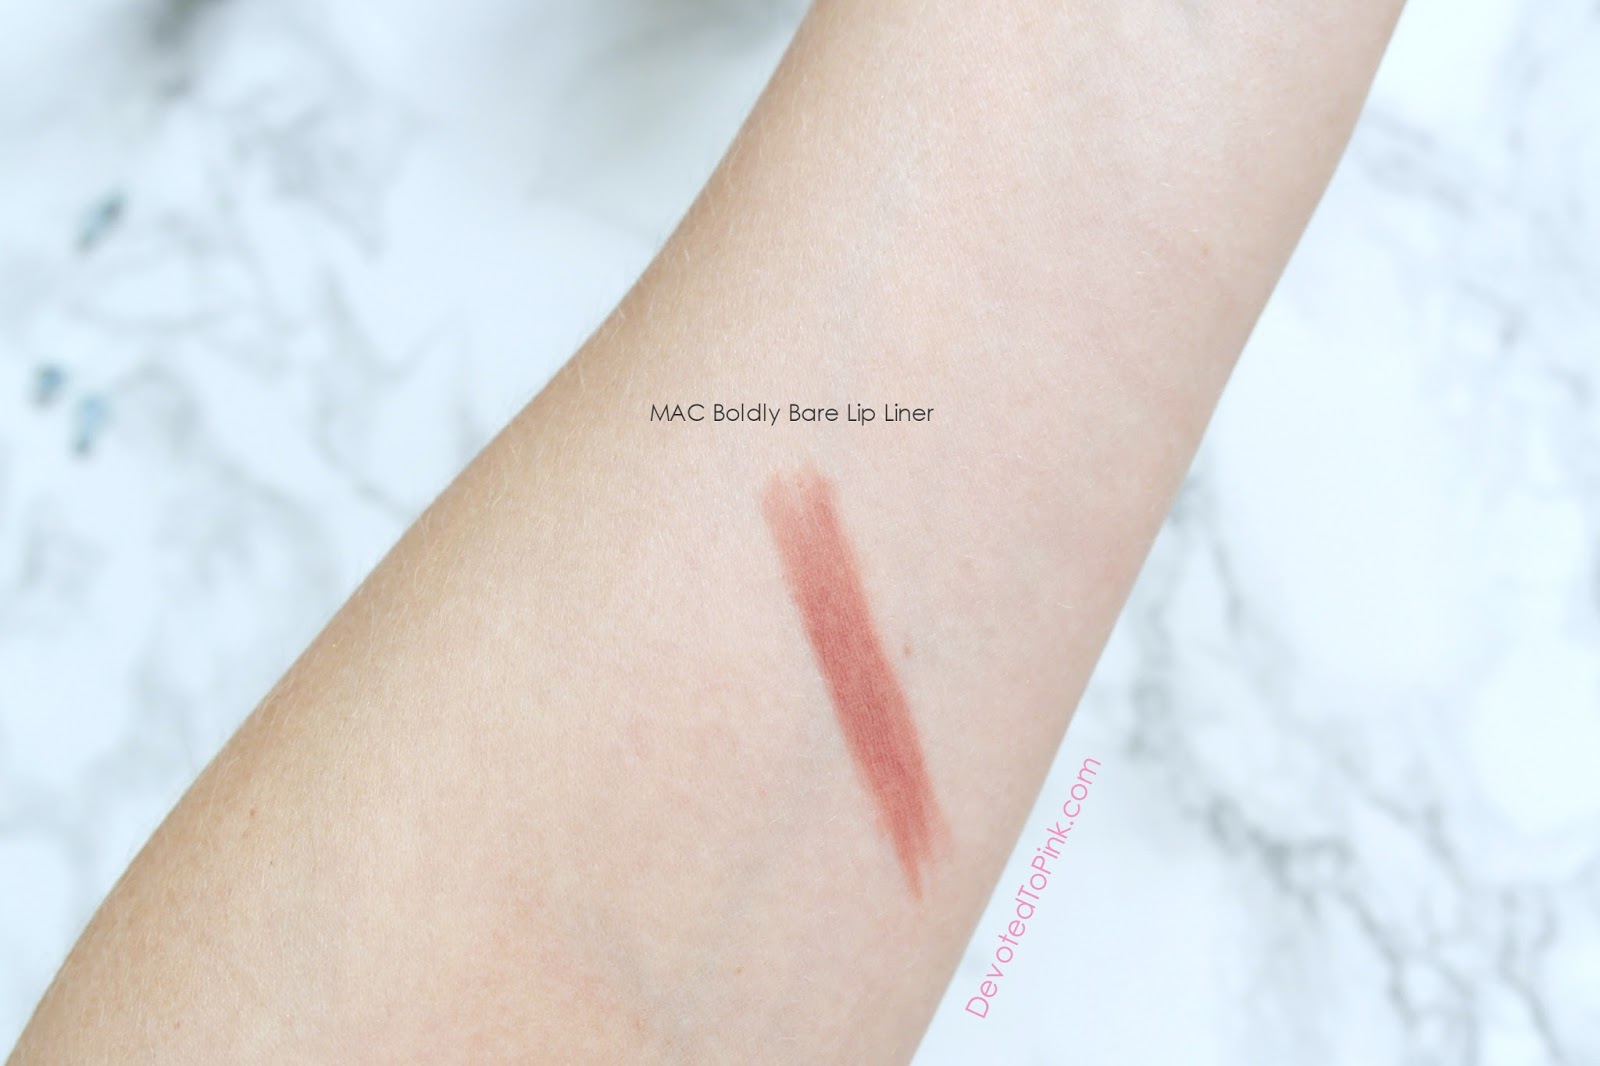 MAC Boldly Bare lip liner, swatches, beauty blogger, review 